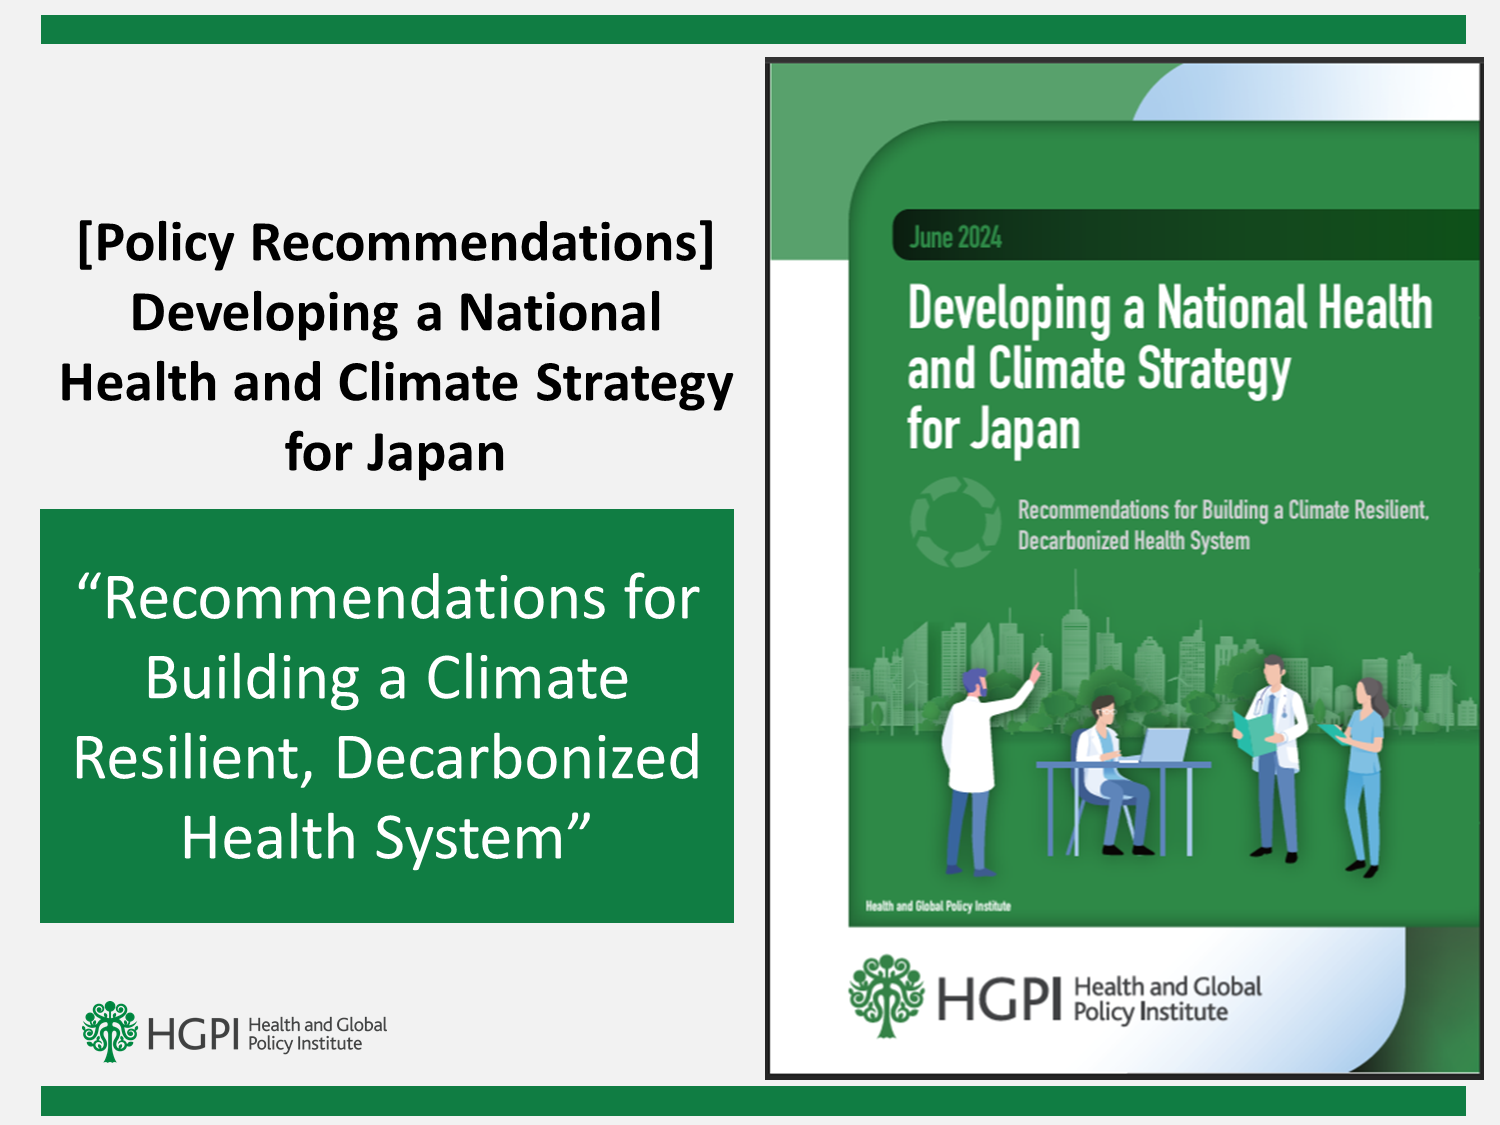 [Policy Recommendations] Developing a National Health and Climate Strategy for Japan (June 26, 2024)